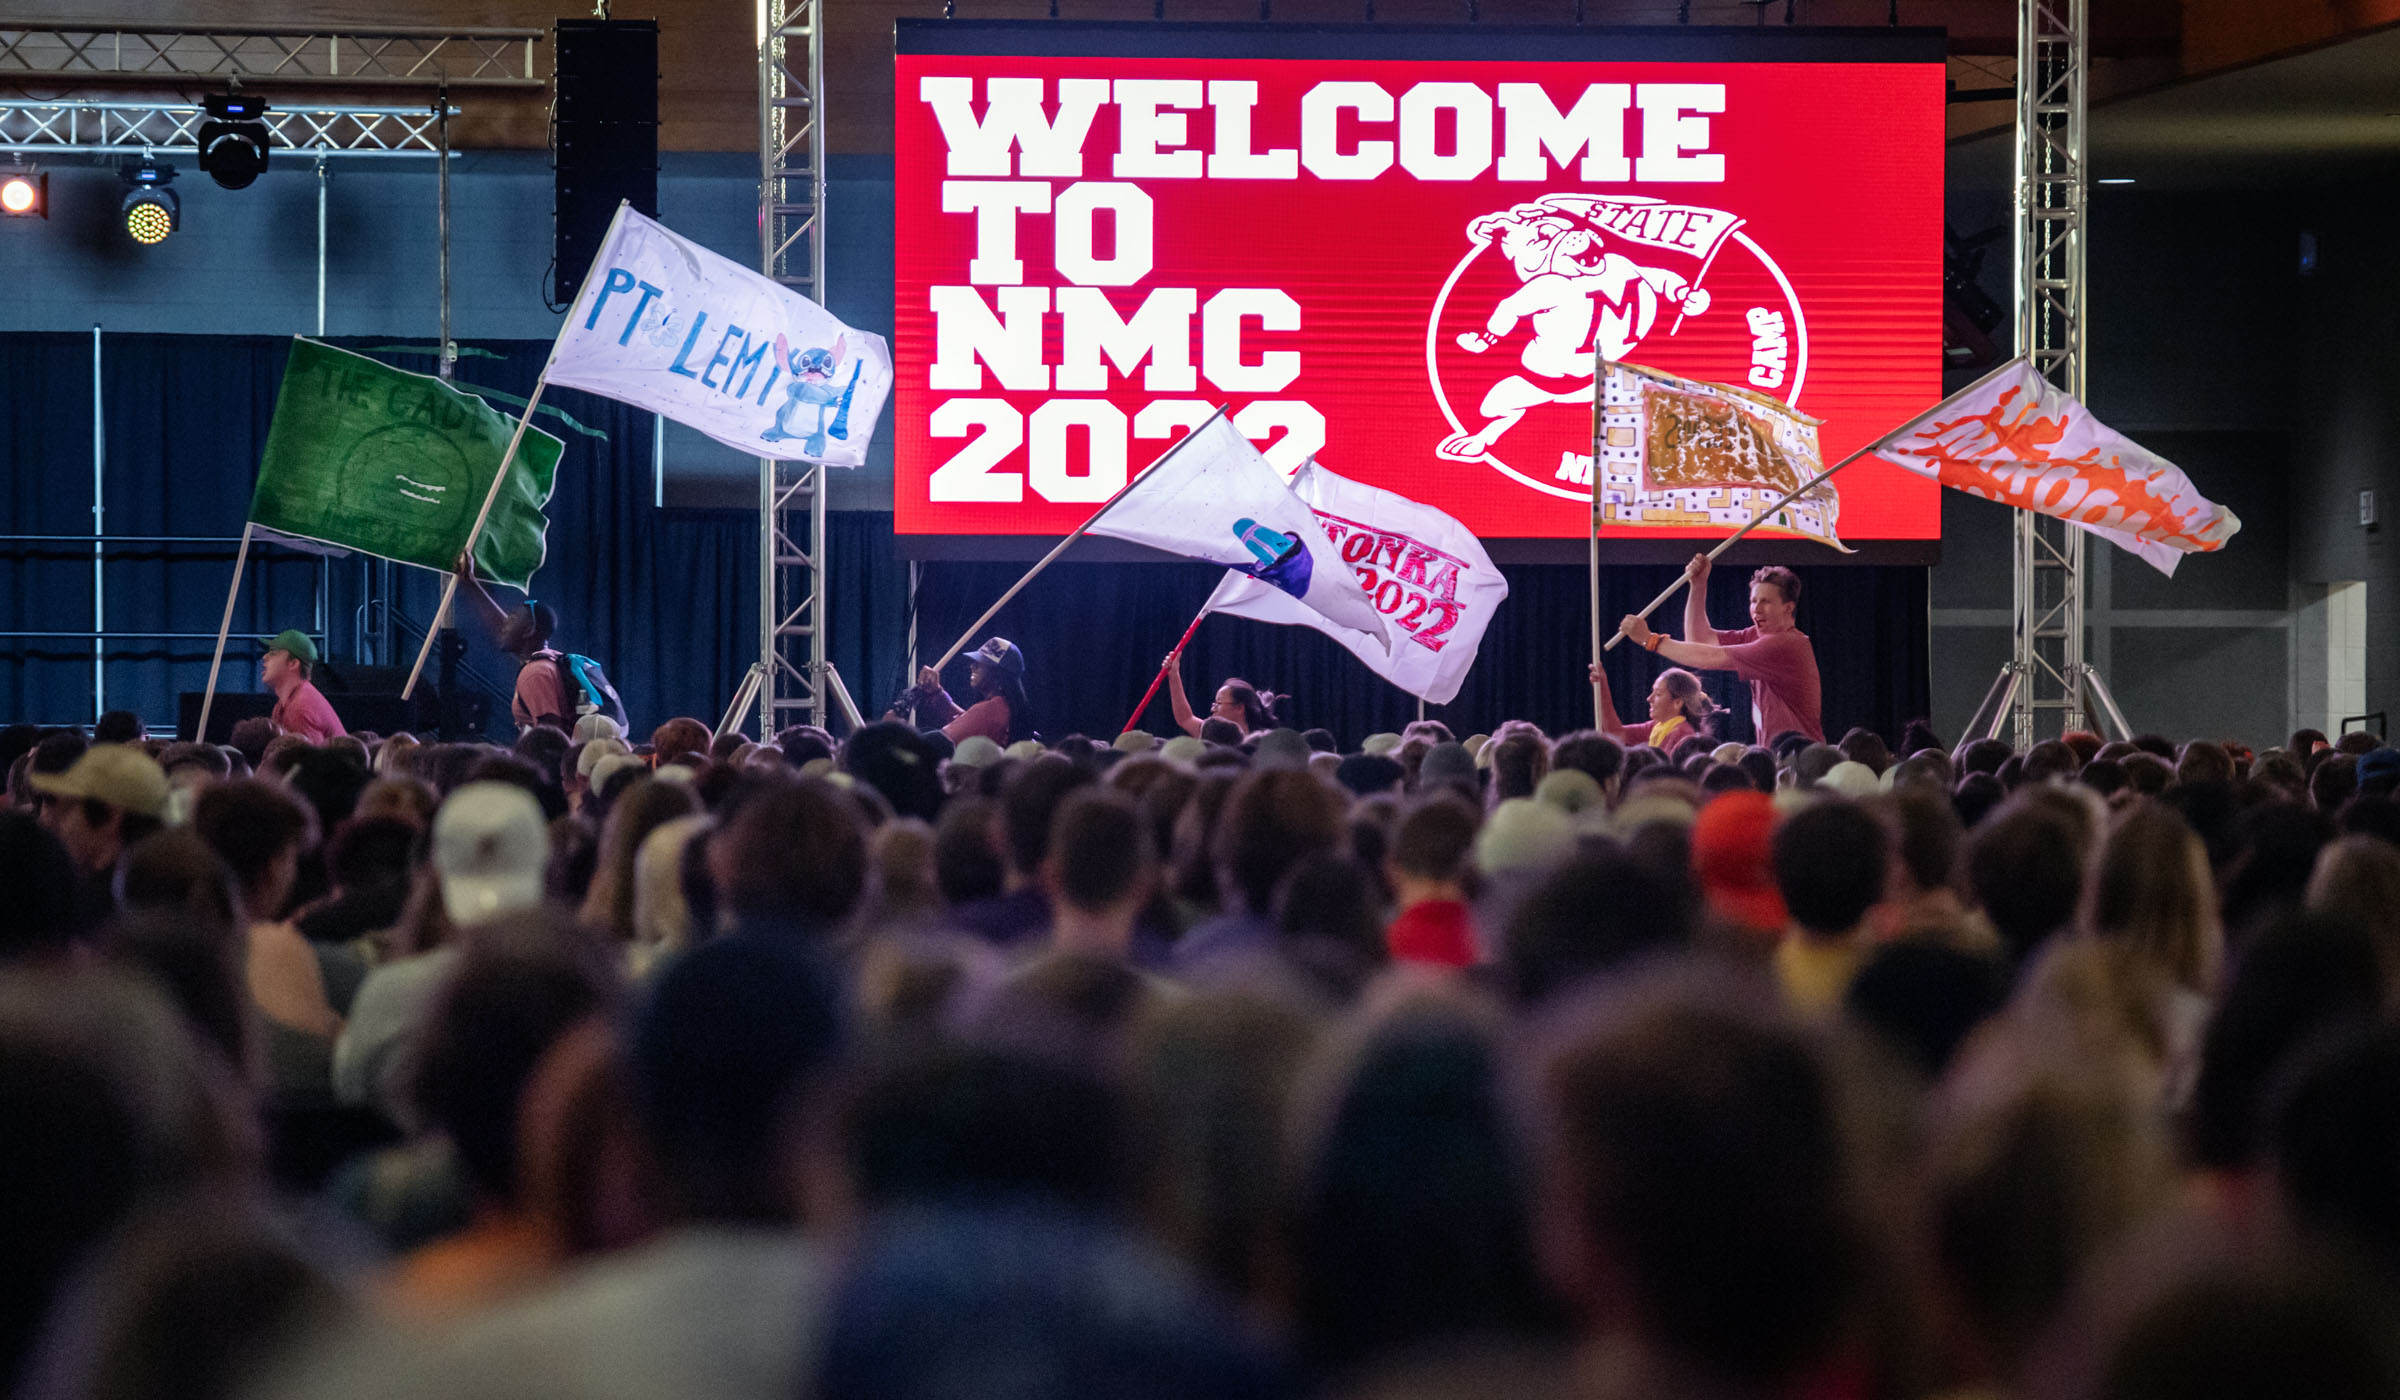 With a sea of New Maroon Camp attendees heads in the foreground, NMC staff run past giant screens with the NMC logo at the beginning of the Opening Ceremonies in Sanderson.